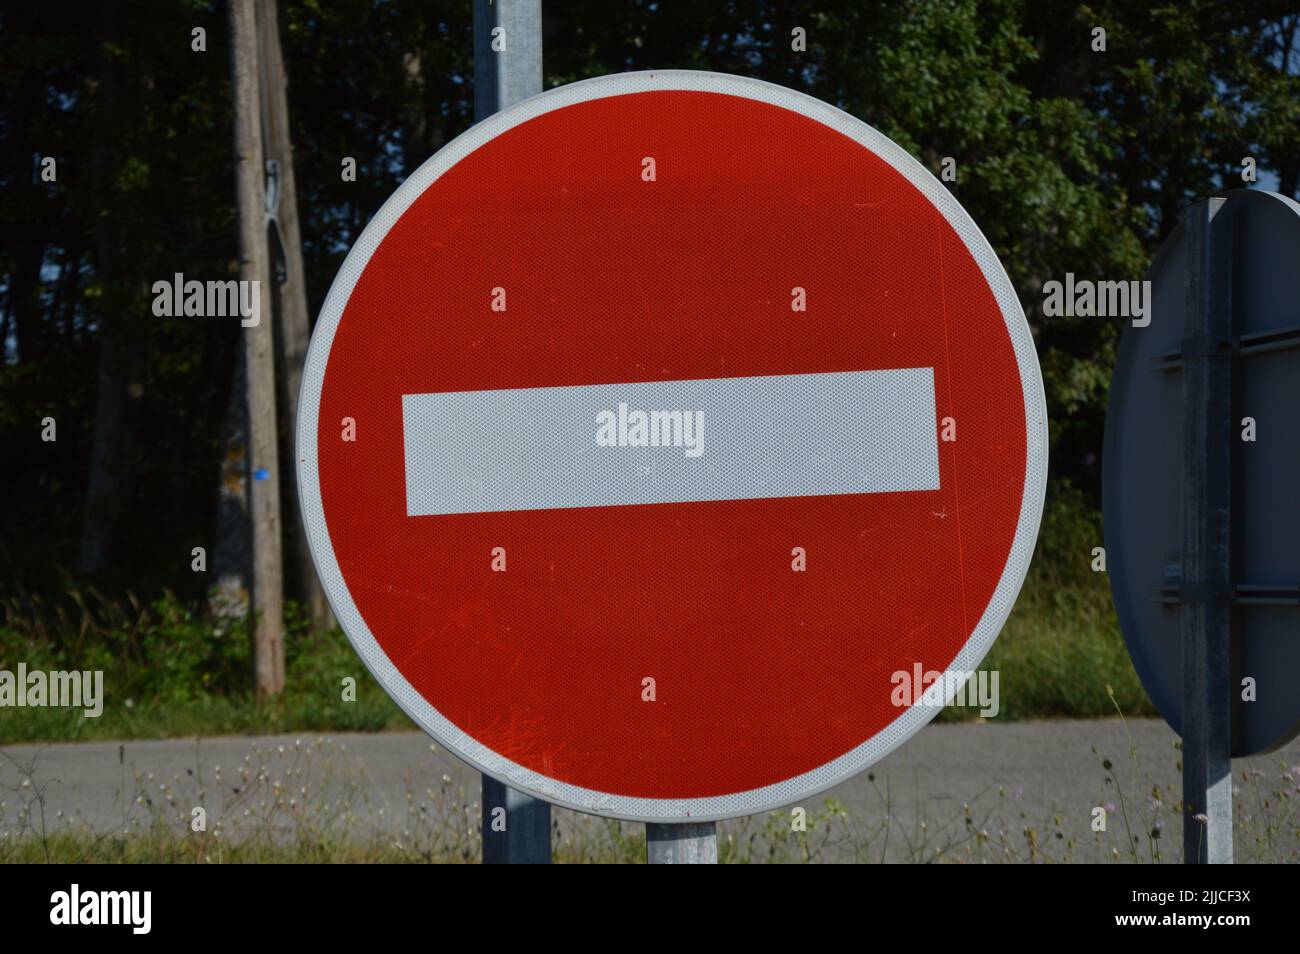 A road sign on a country road in France Stock Photo